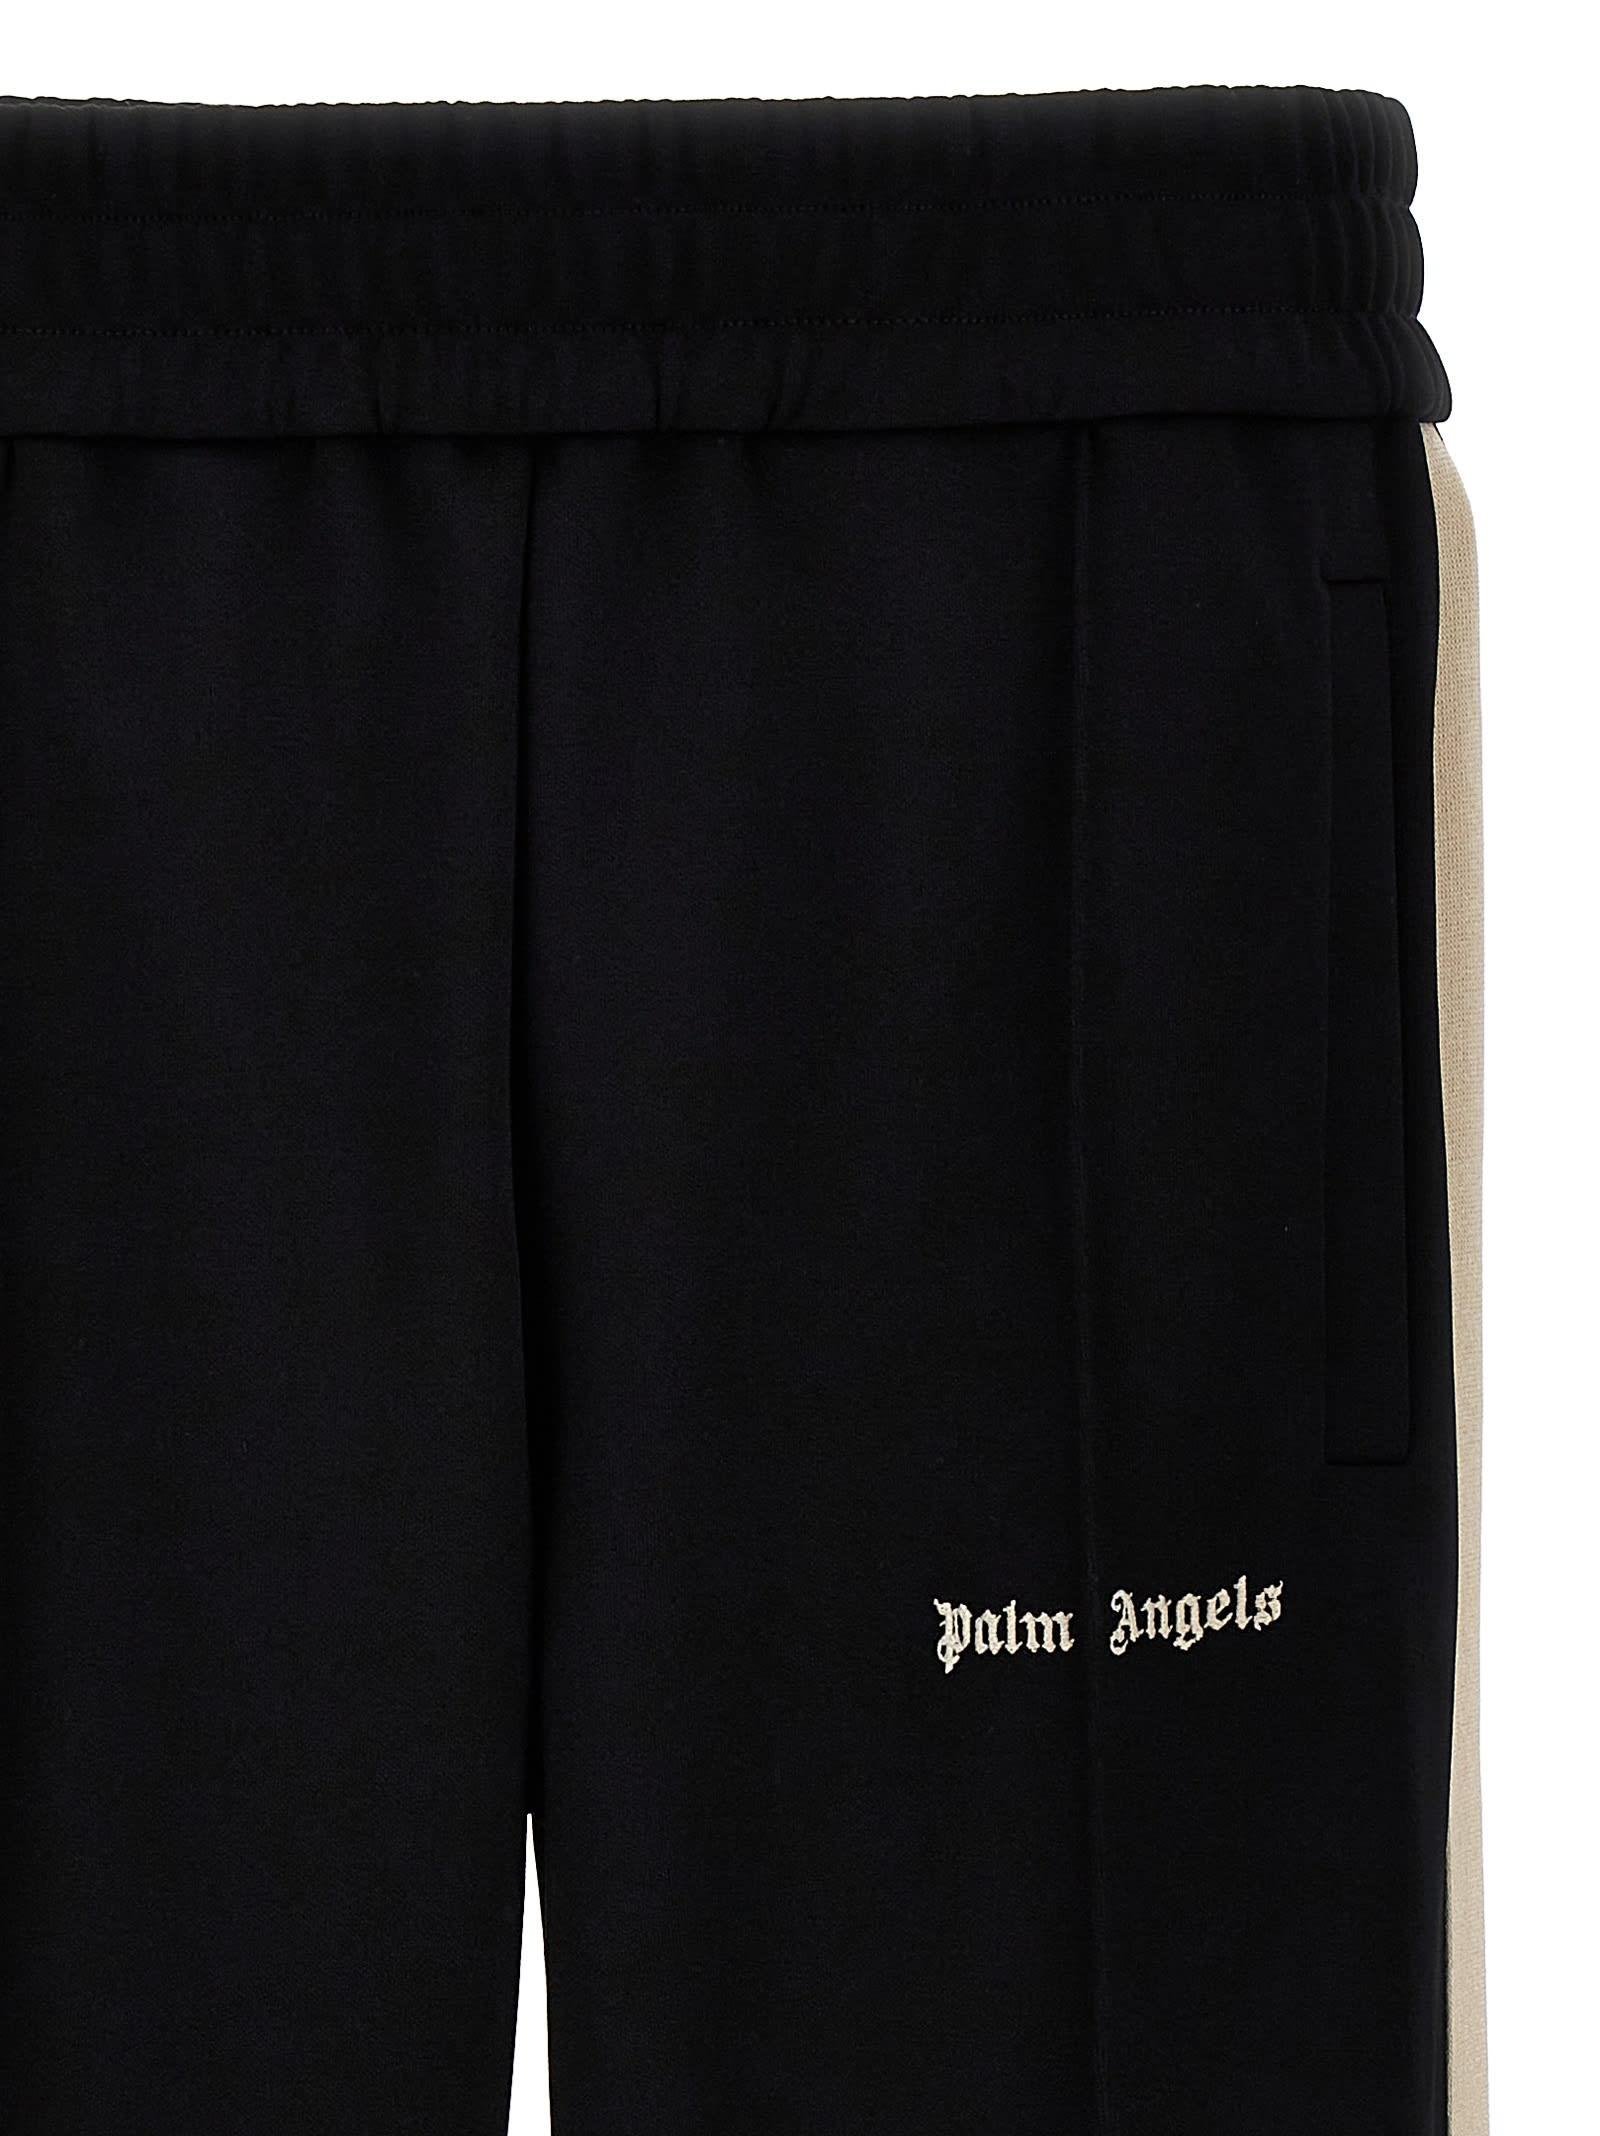 Palm Angels Classic Logo Track Pants in Black for Men